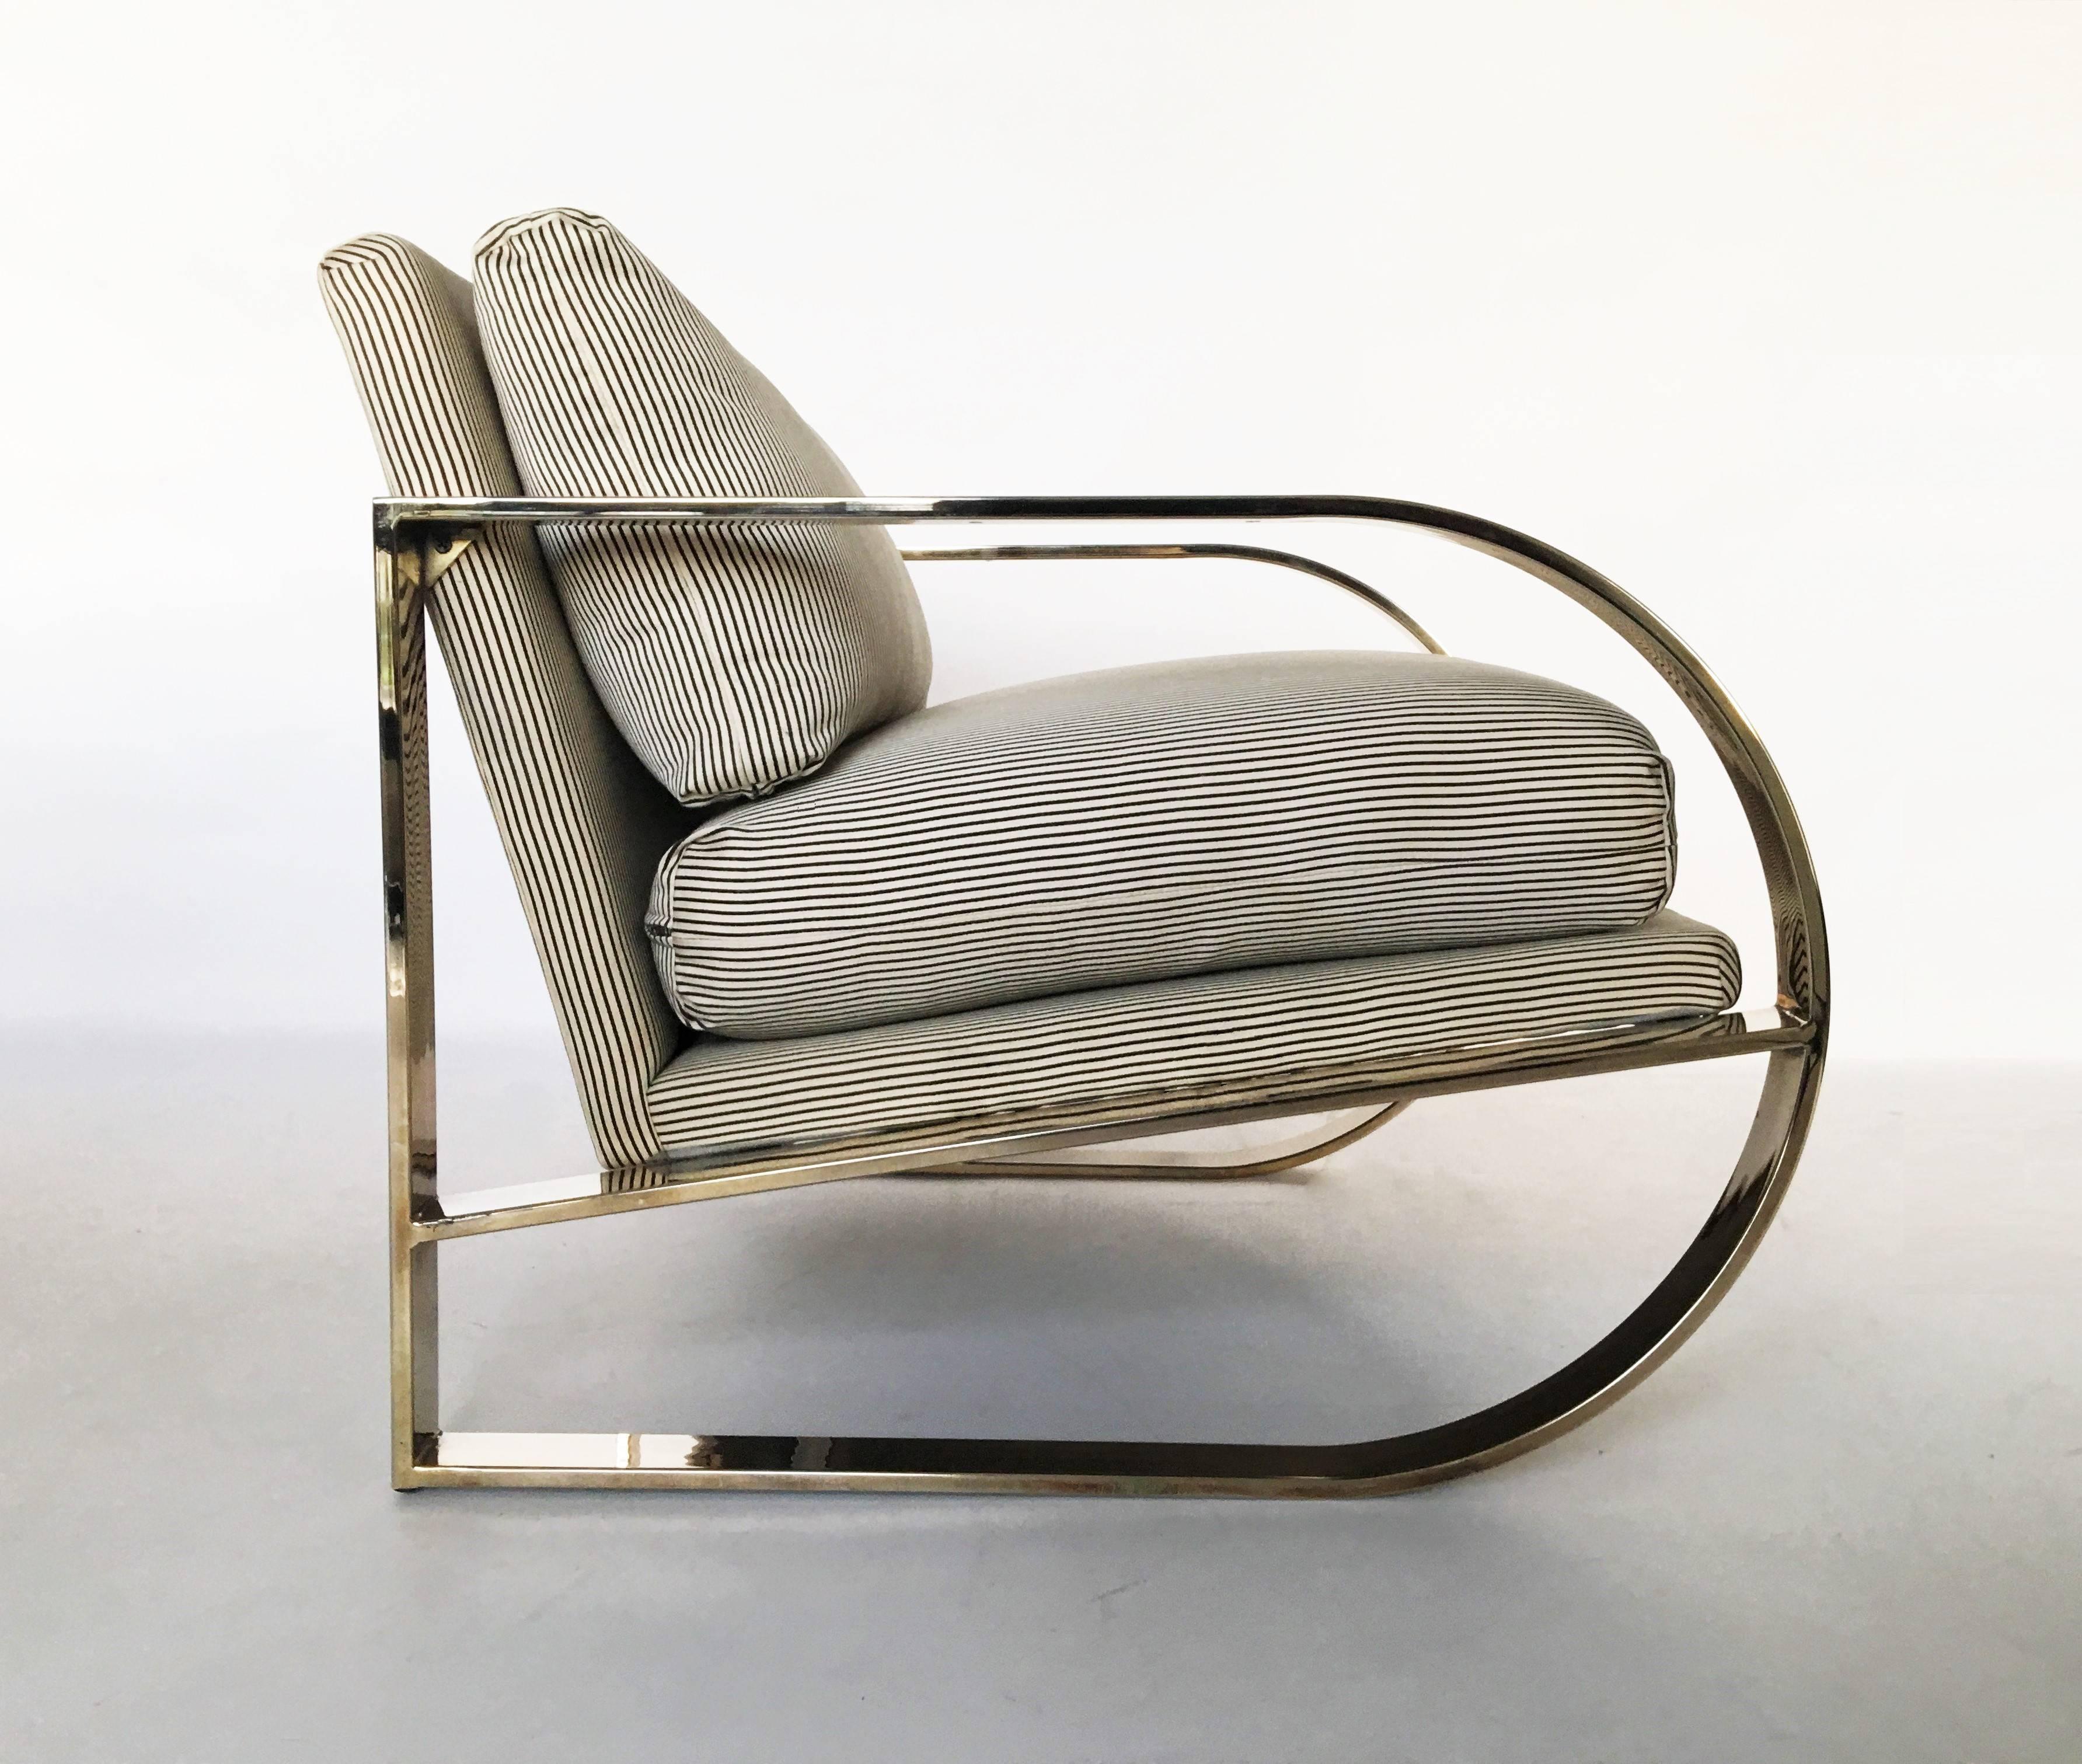 Rare lounge chair designed by John Mascheroni for Swaim Originals. A geometric form melds with the stripped upholstery to create this wonderfully comfortable yet striking flat bar 